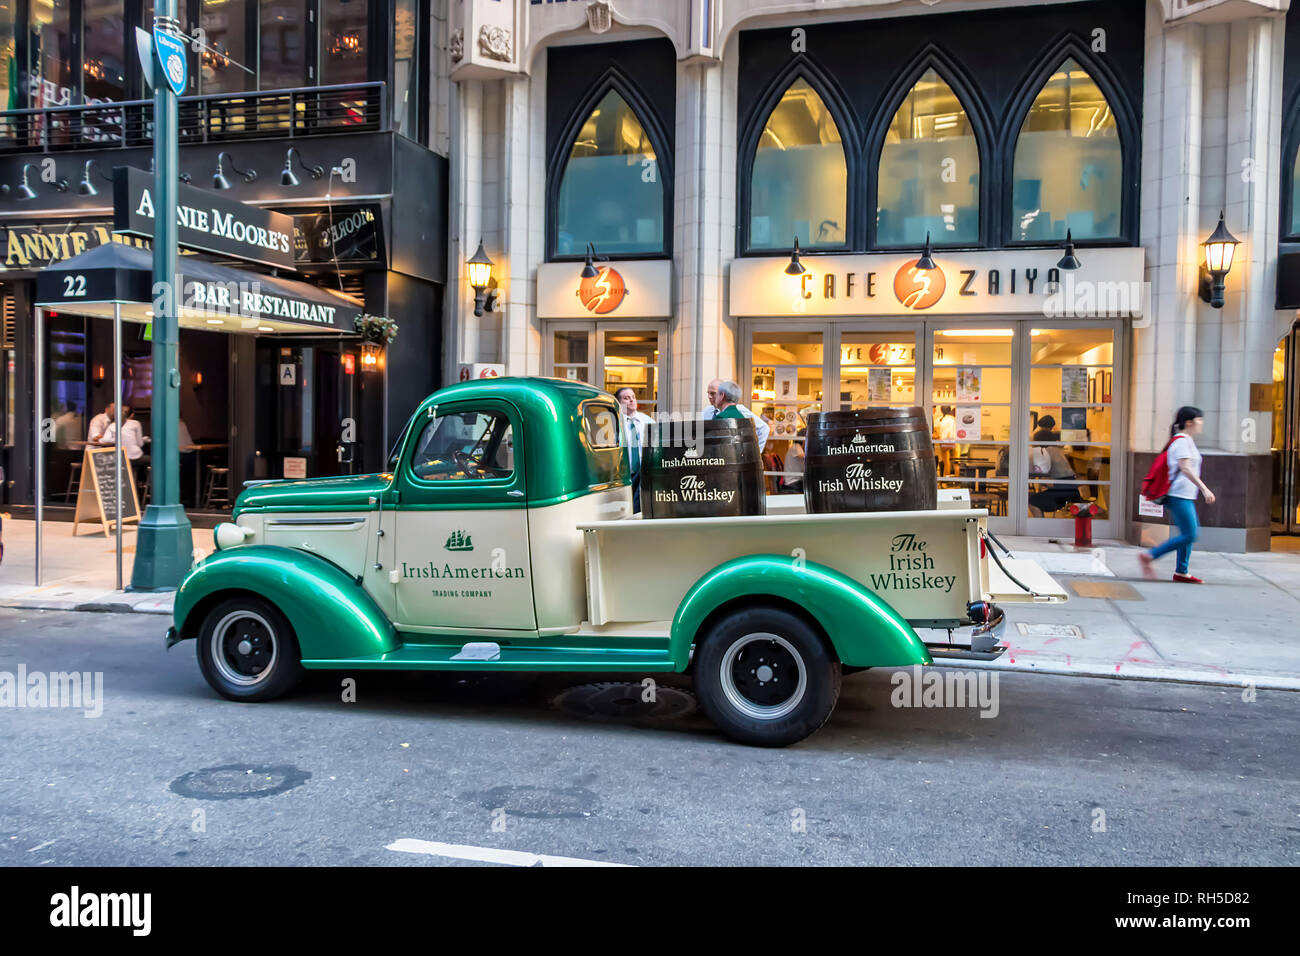 Classic Green and White Chevrolet 3100 pickup truck of 'IrishAmerican' company, parked in library way, New York C Stock Photo